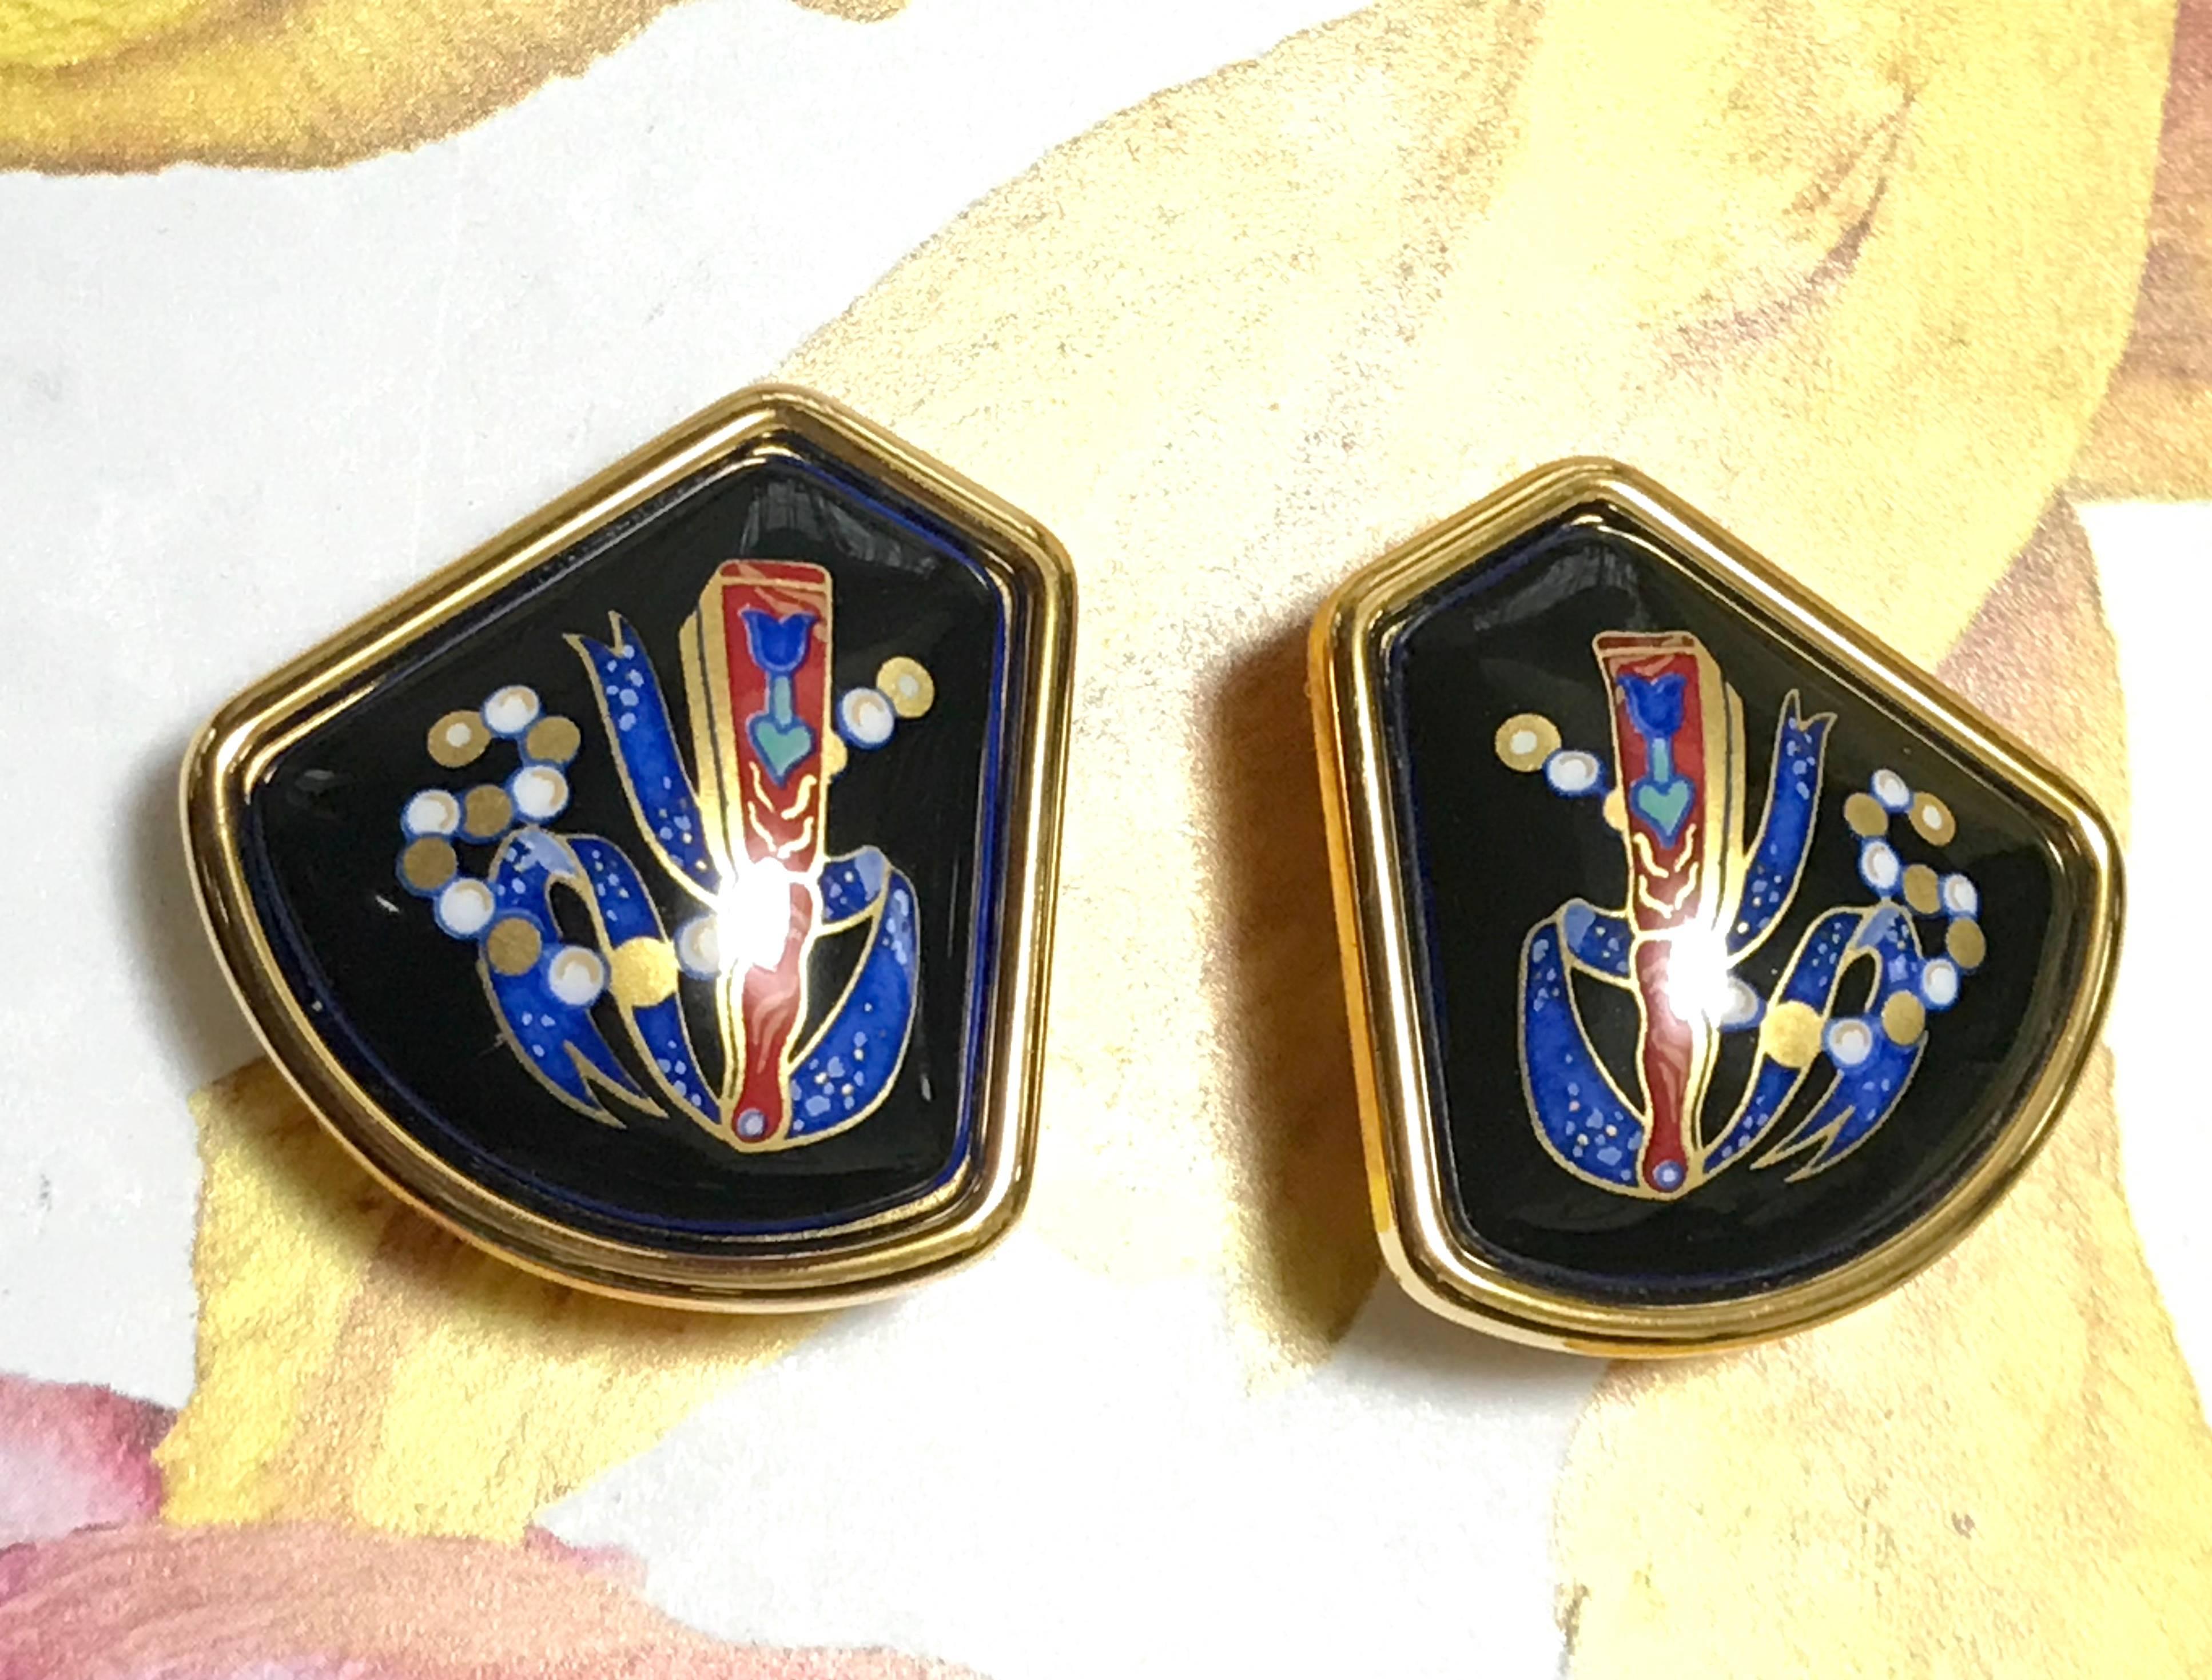 1990s. MINT. Vintage Hermes black cloisonné enamel golden earrings with red fan with blue ribbon and golden and white pearl design. Fan shape.

MINT. Excellent vintage condition!
Fabulous earrings in HERMES's iconic cloisonne.
Excellent beauty and